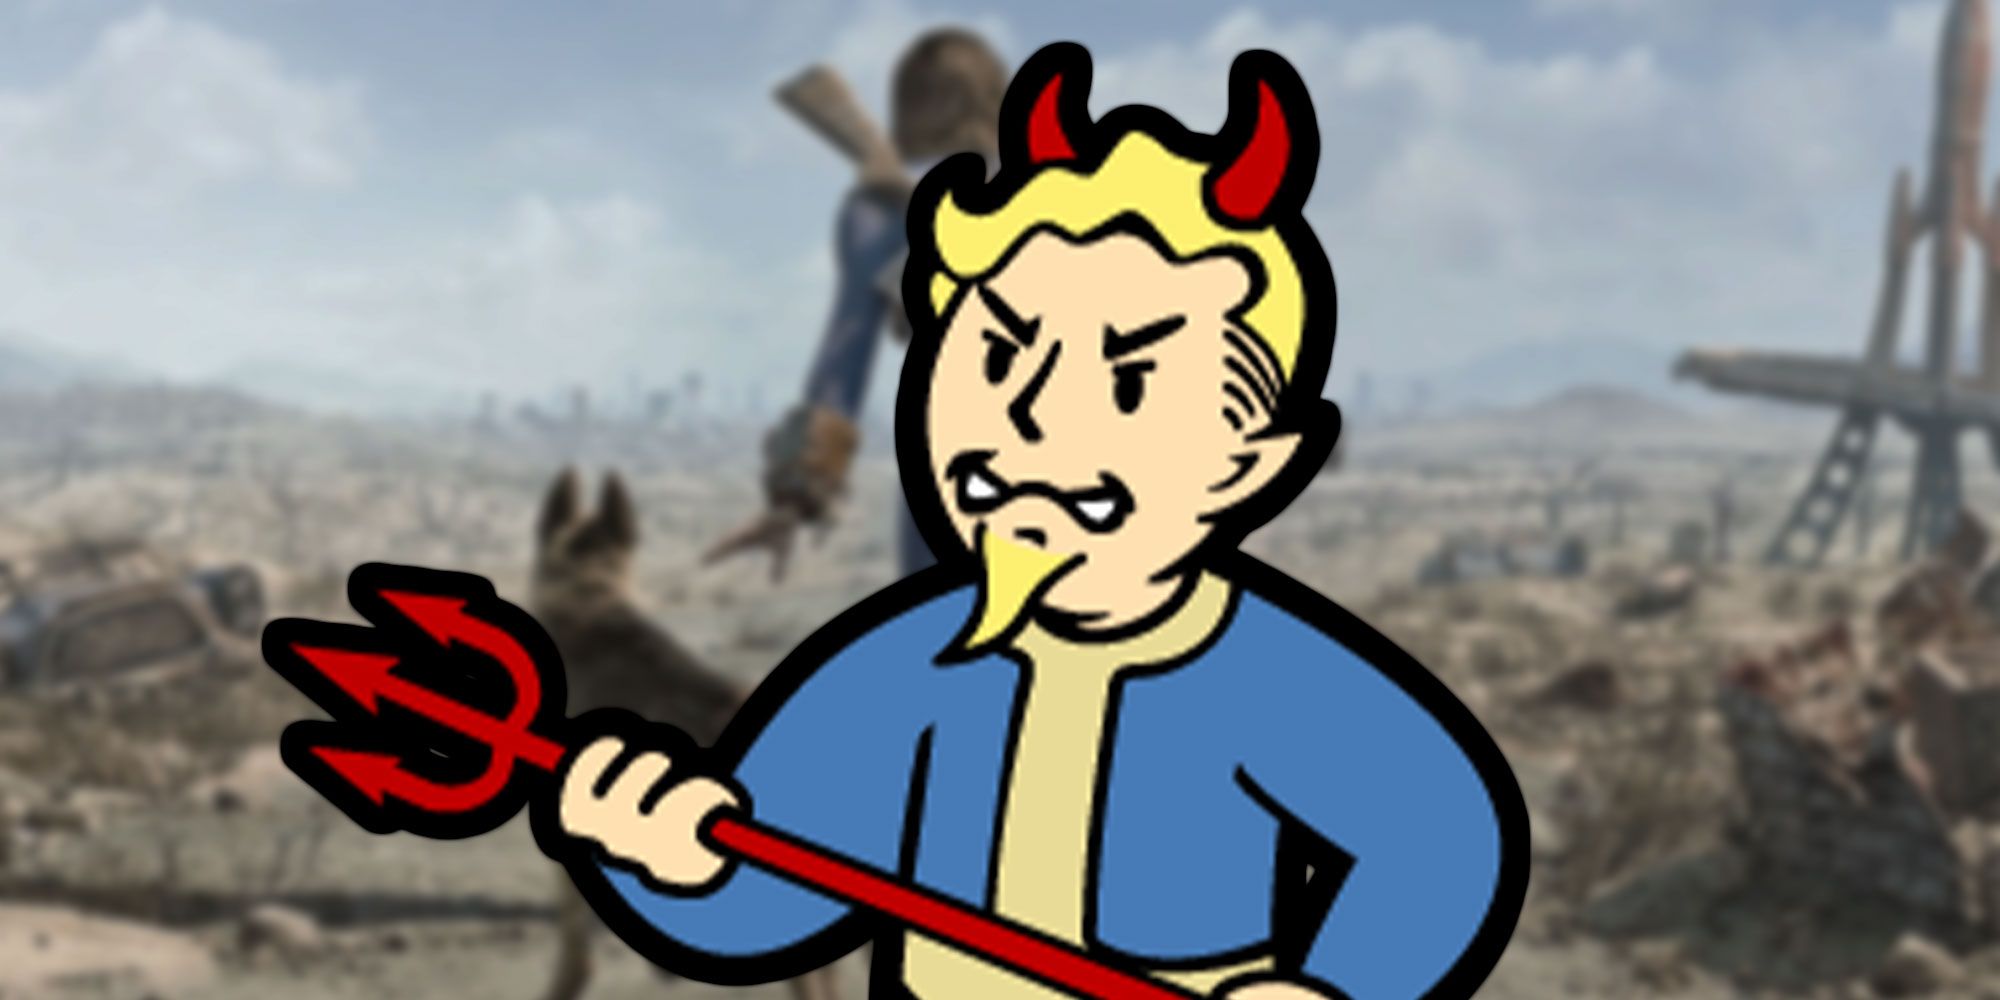 Vault boy's devil alter ego from Fallout